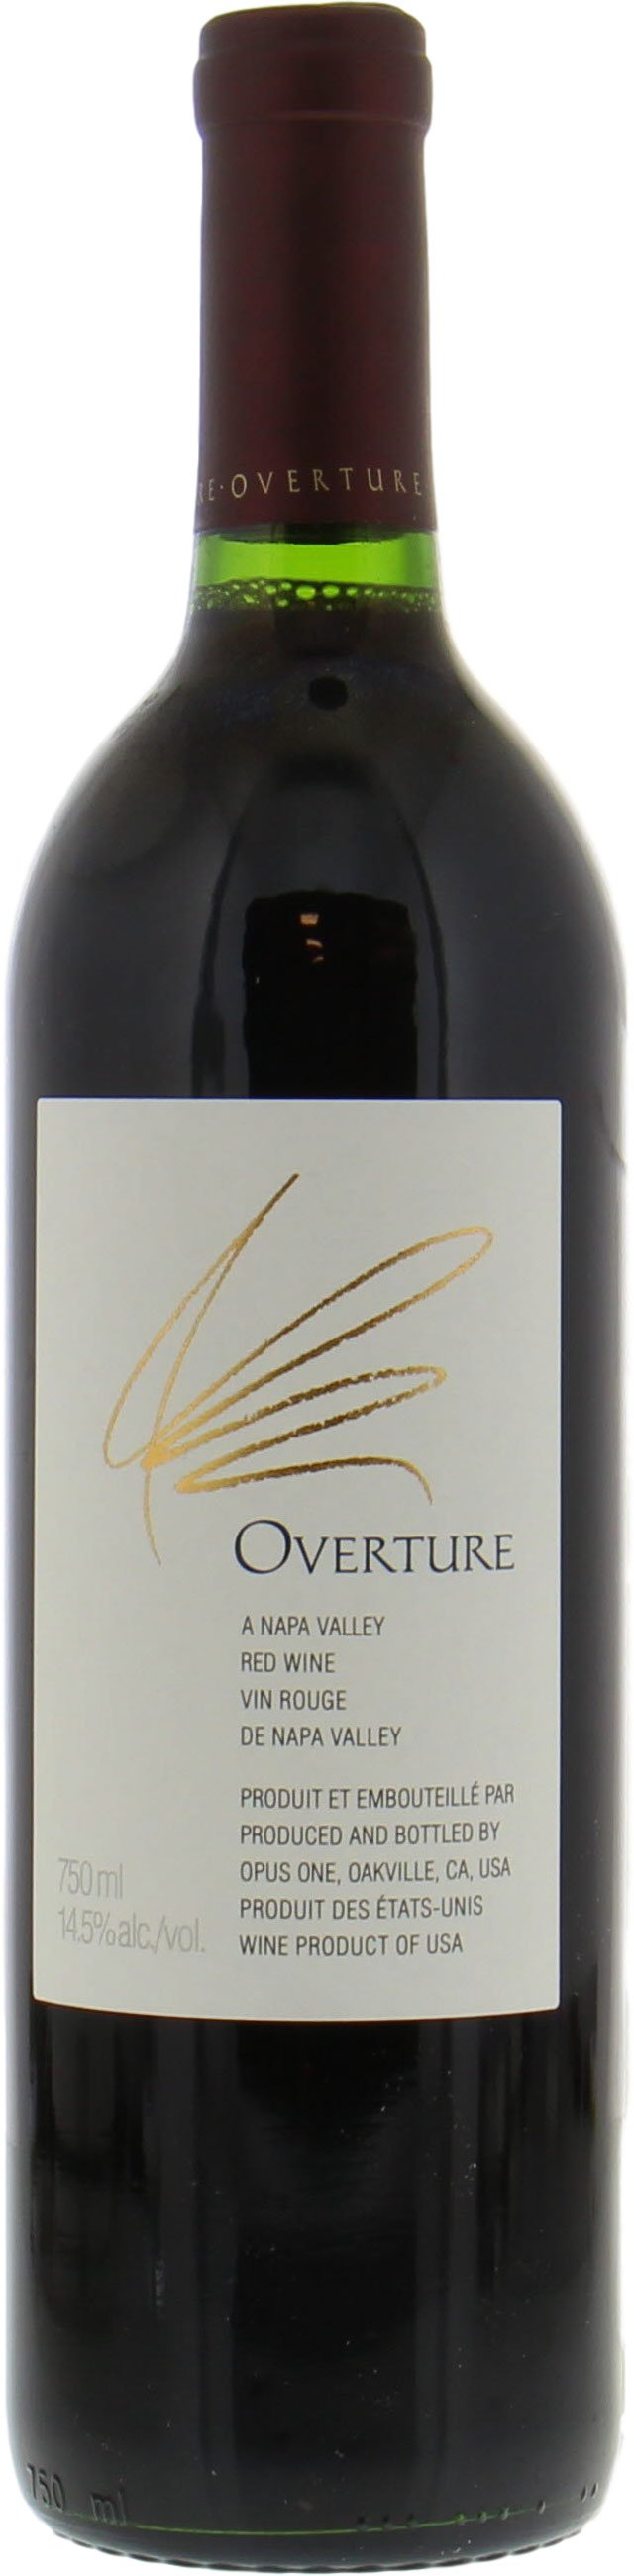 Opus One - Overture release 2018 2018 Perfect